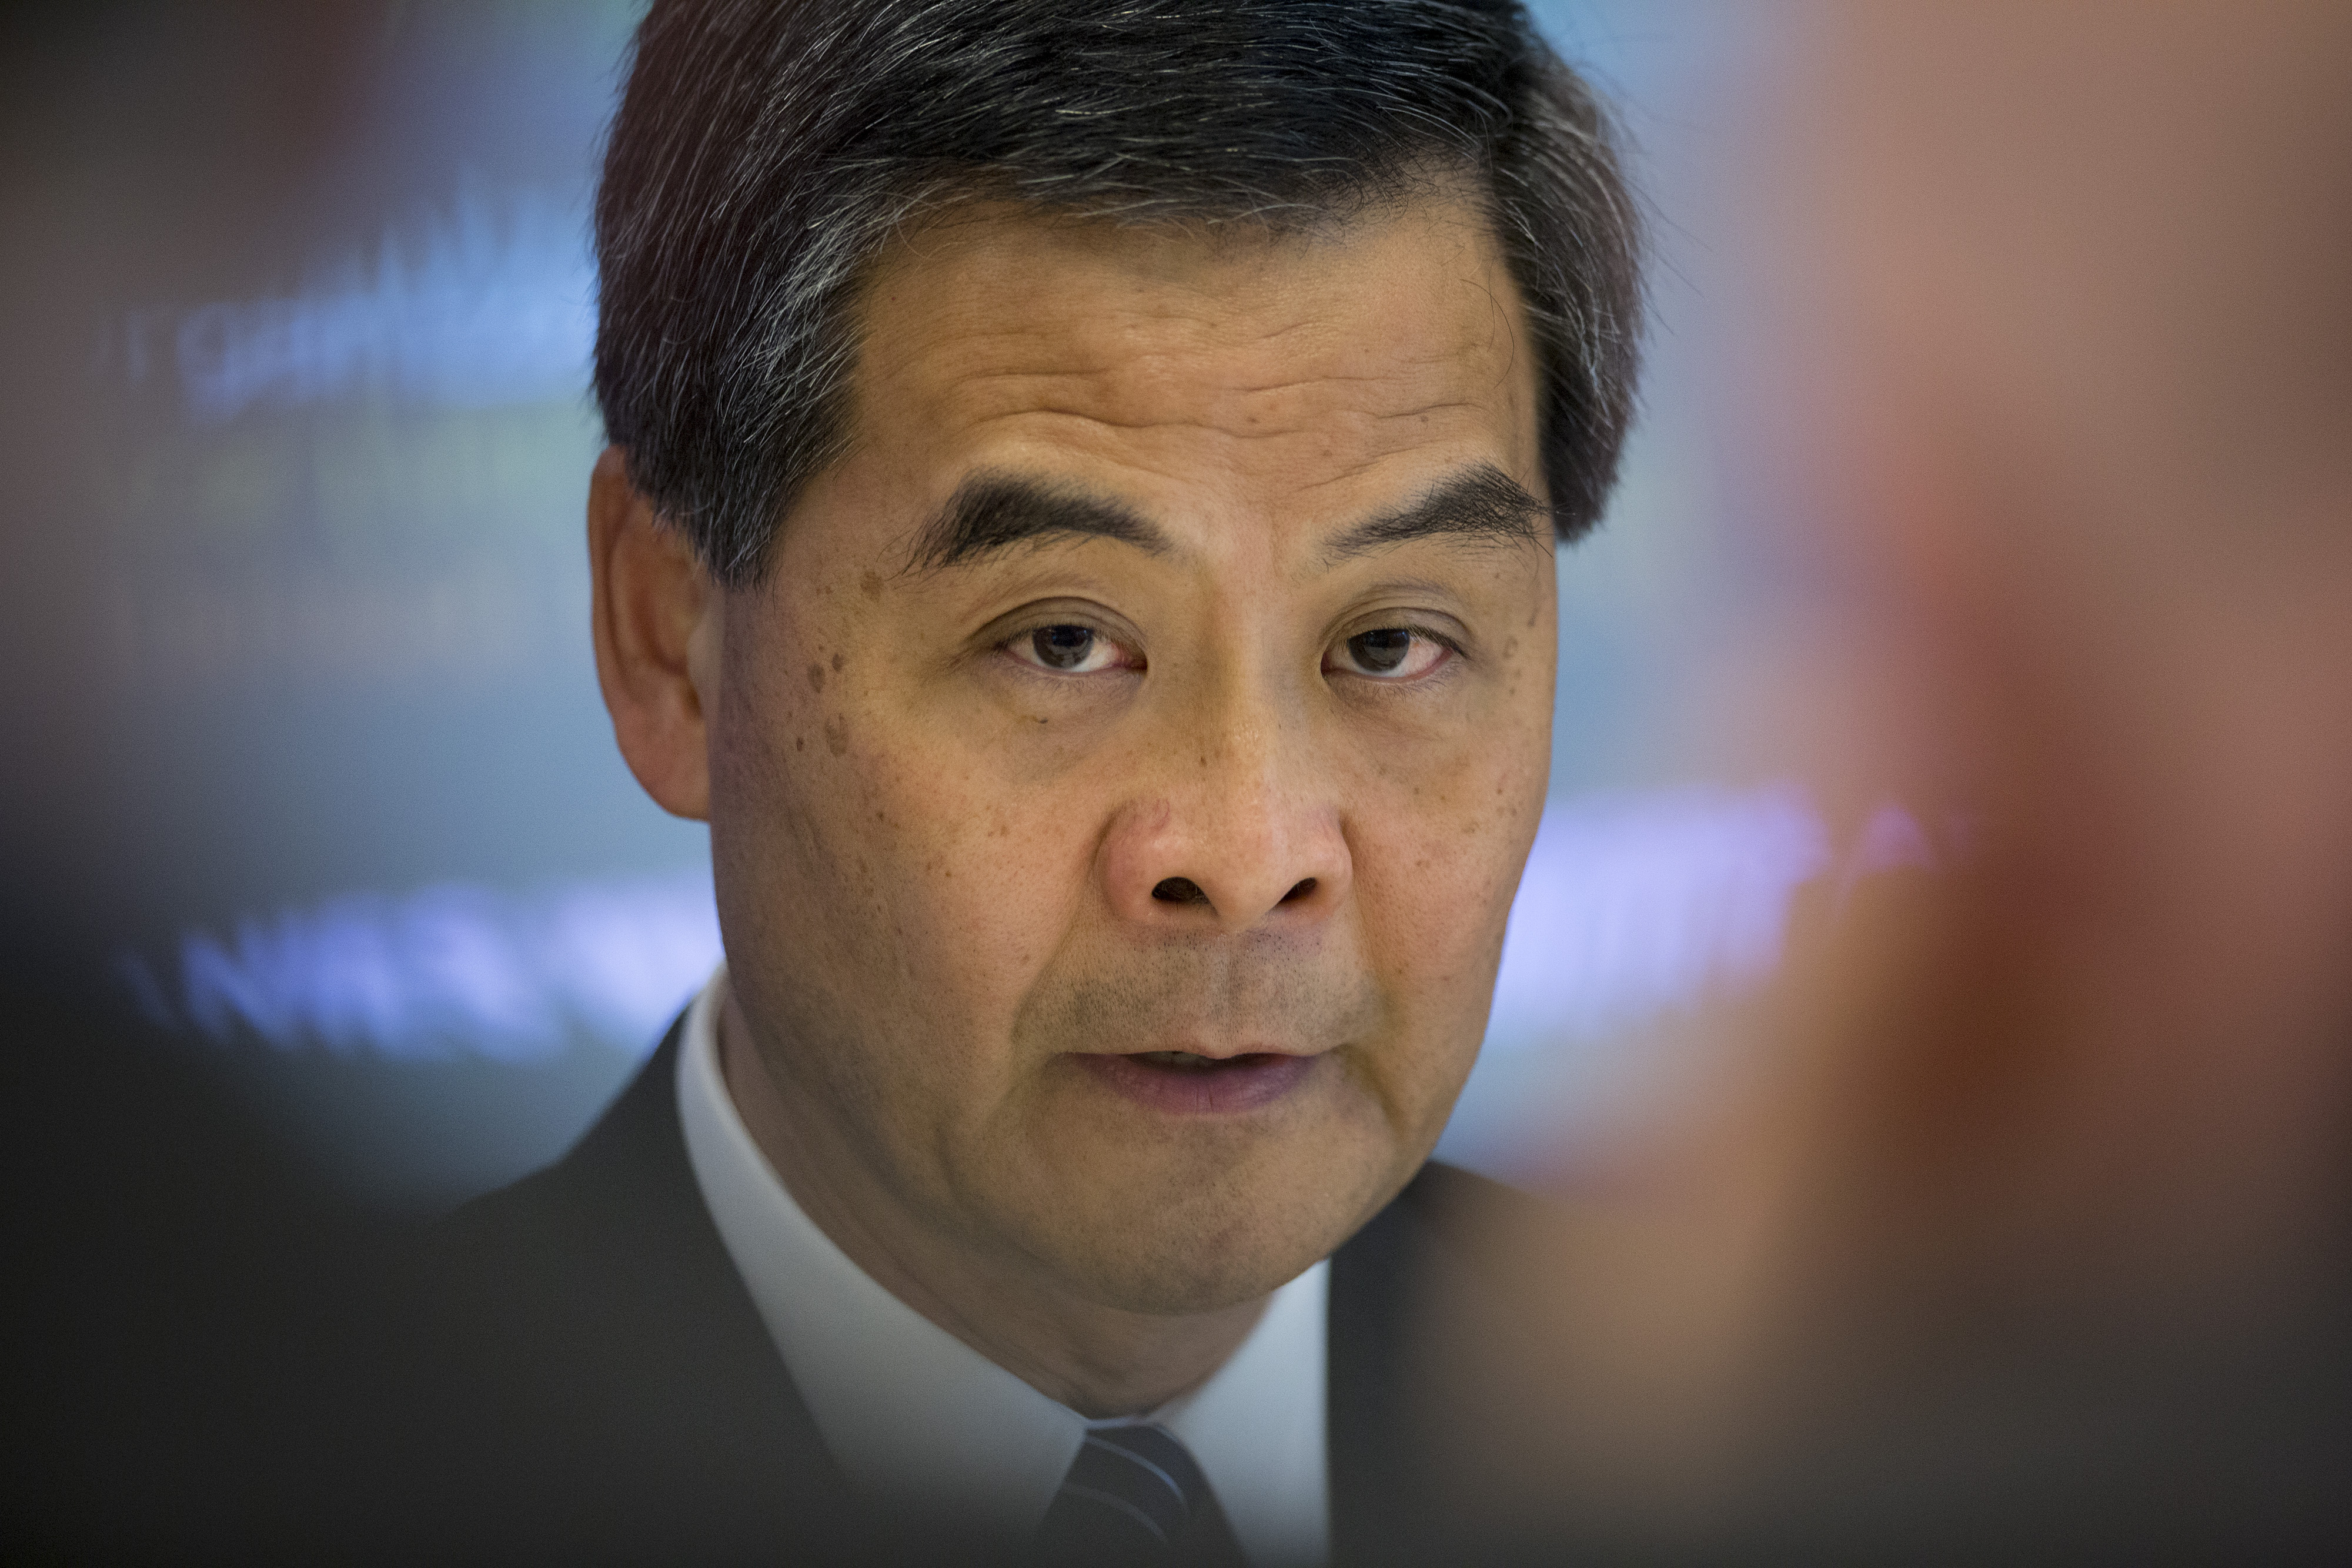 Leung Chun-ying, Hong Kong's chief executive, speaks during an interview in New York, U.S., on Wednesday, June 12, 2013. (Bloomberg/Getty Images)